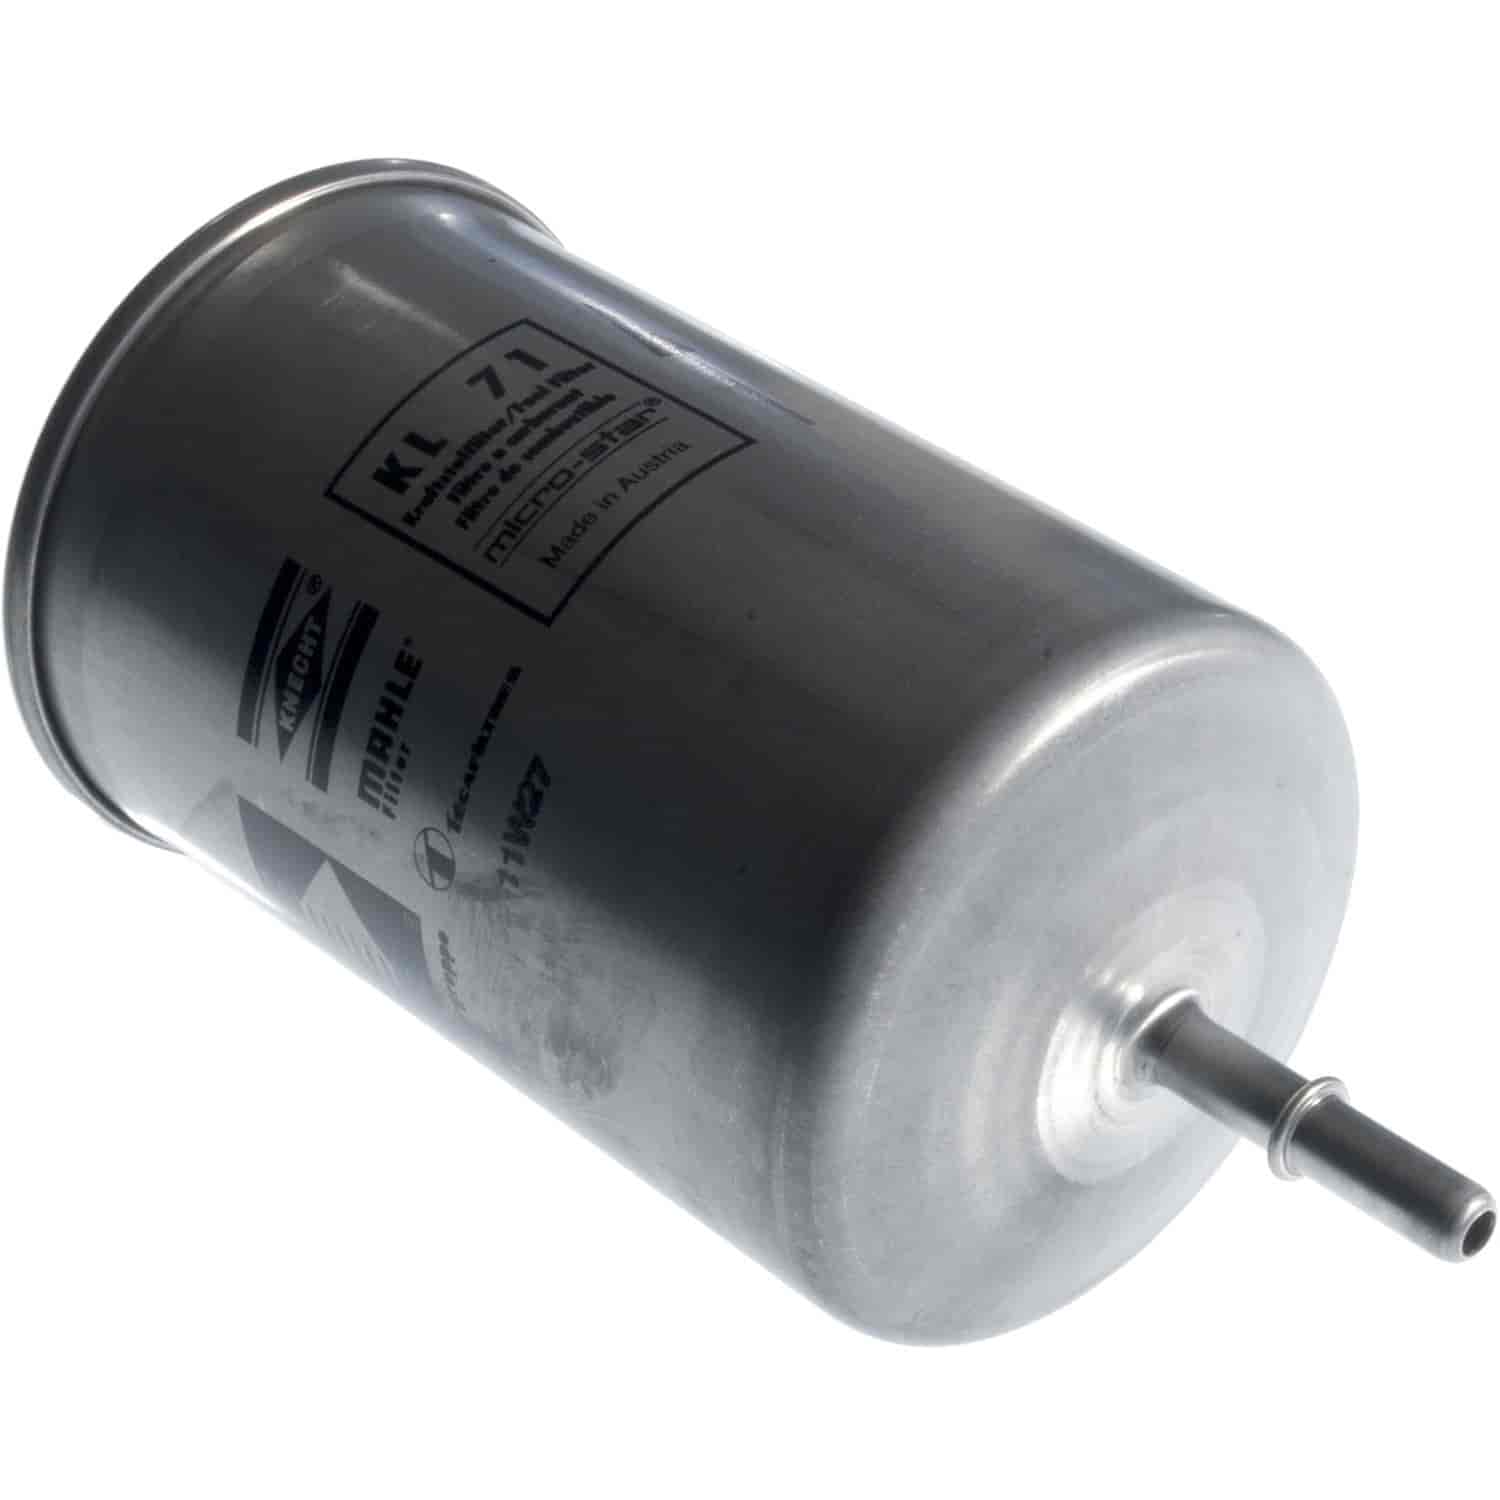 Mahle Fuel Filter Volvo S80 1999-2001 UPTO CH